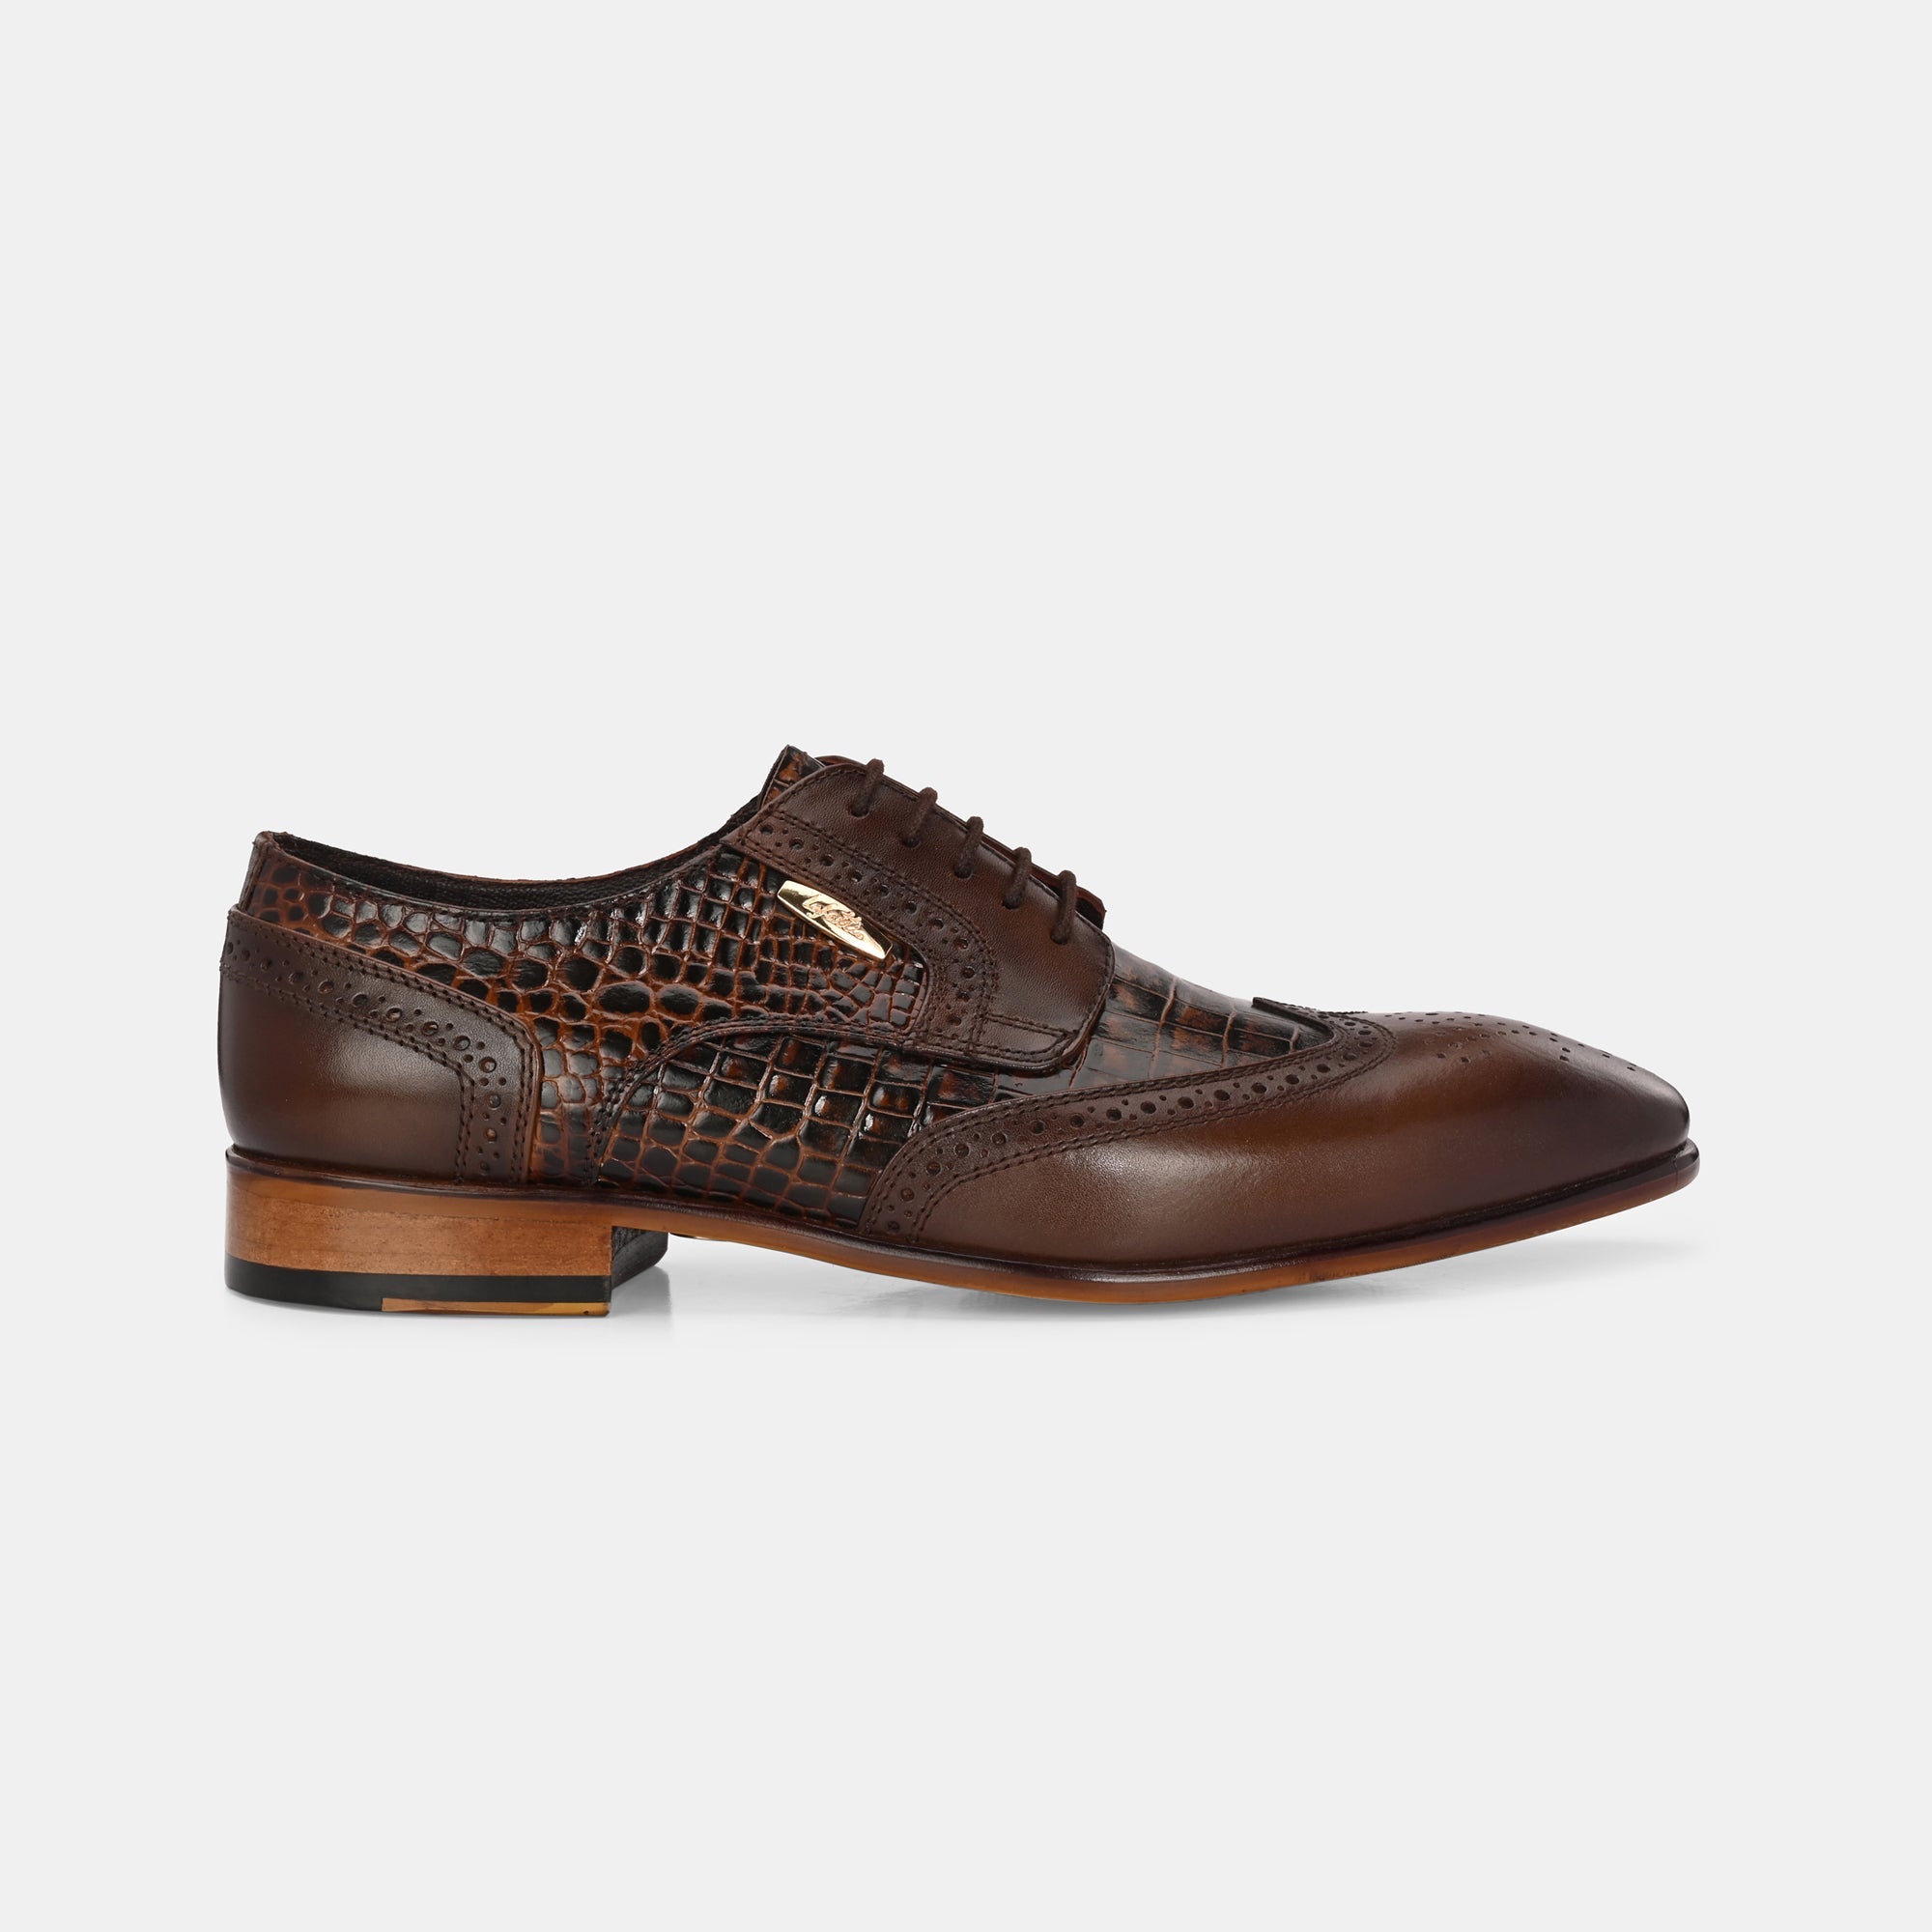 Colour-Blocked Lace-Up Brogues by Lafattio